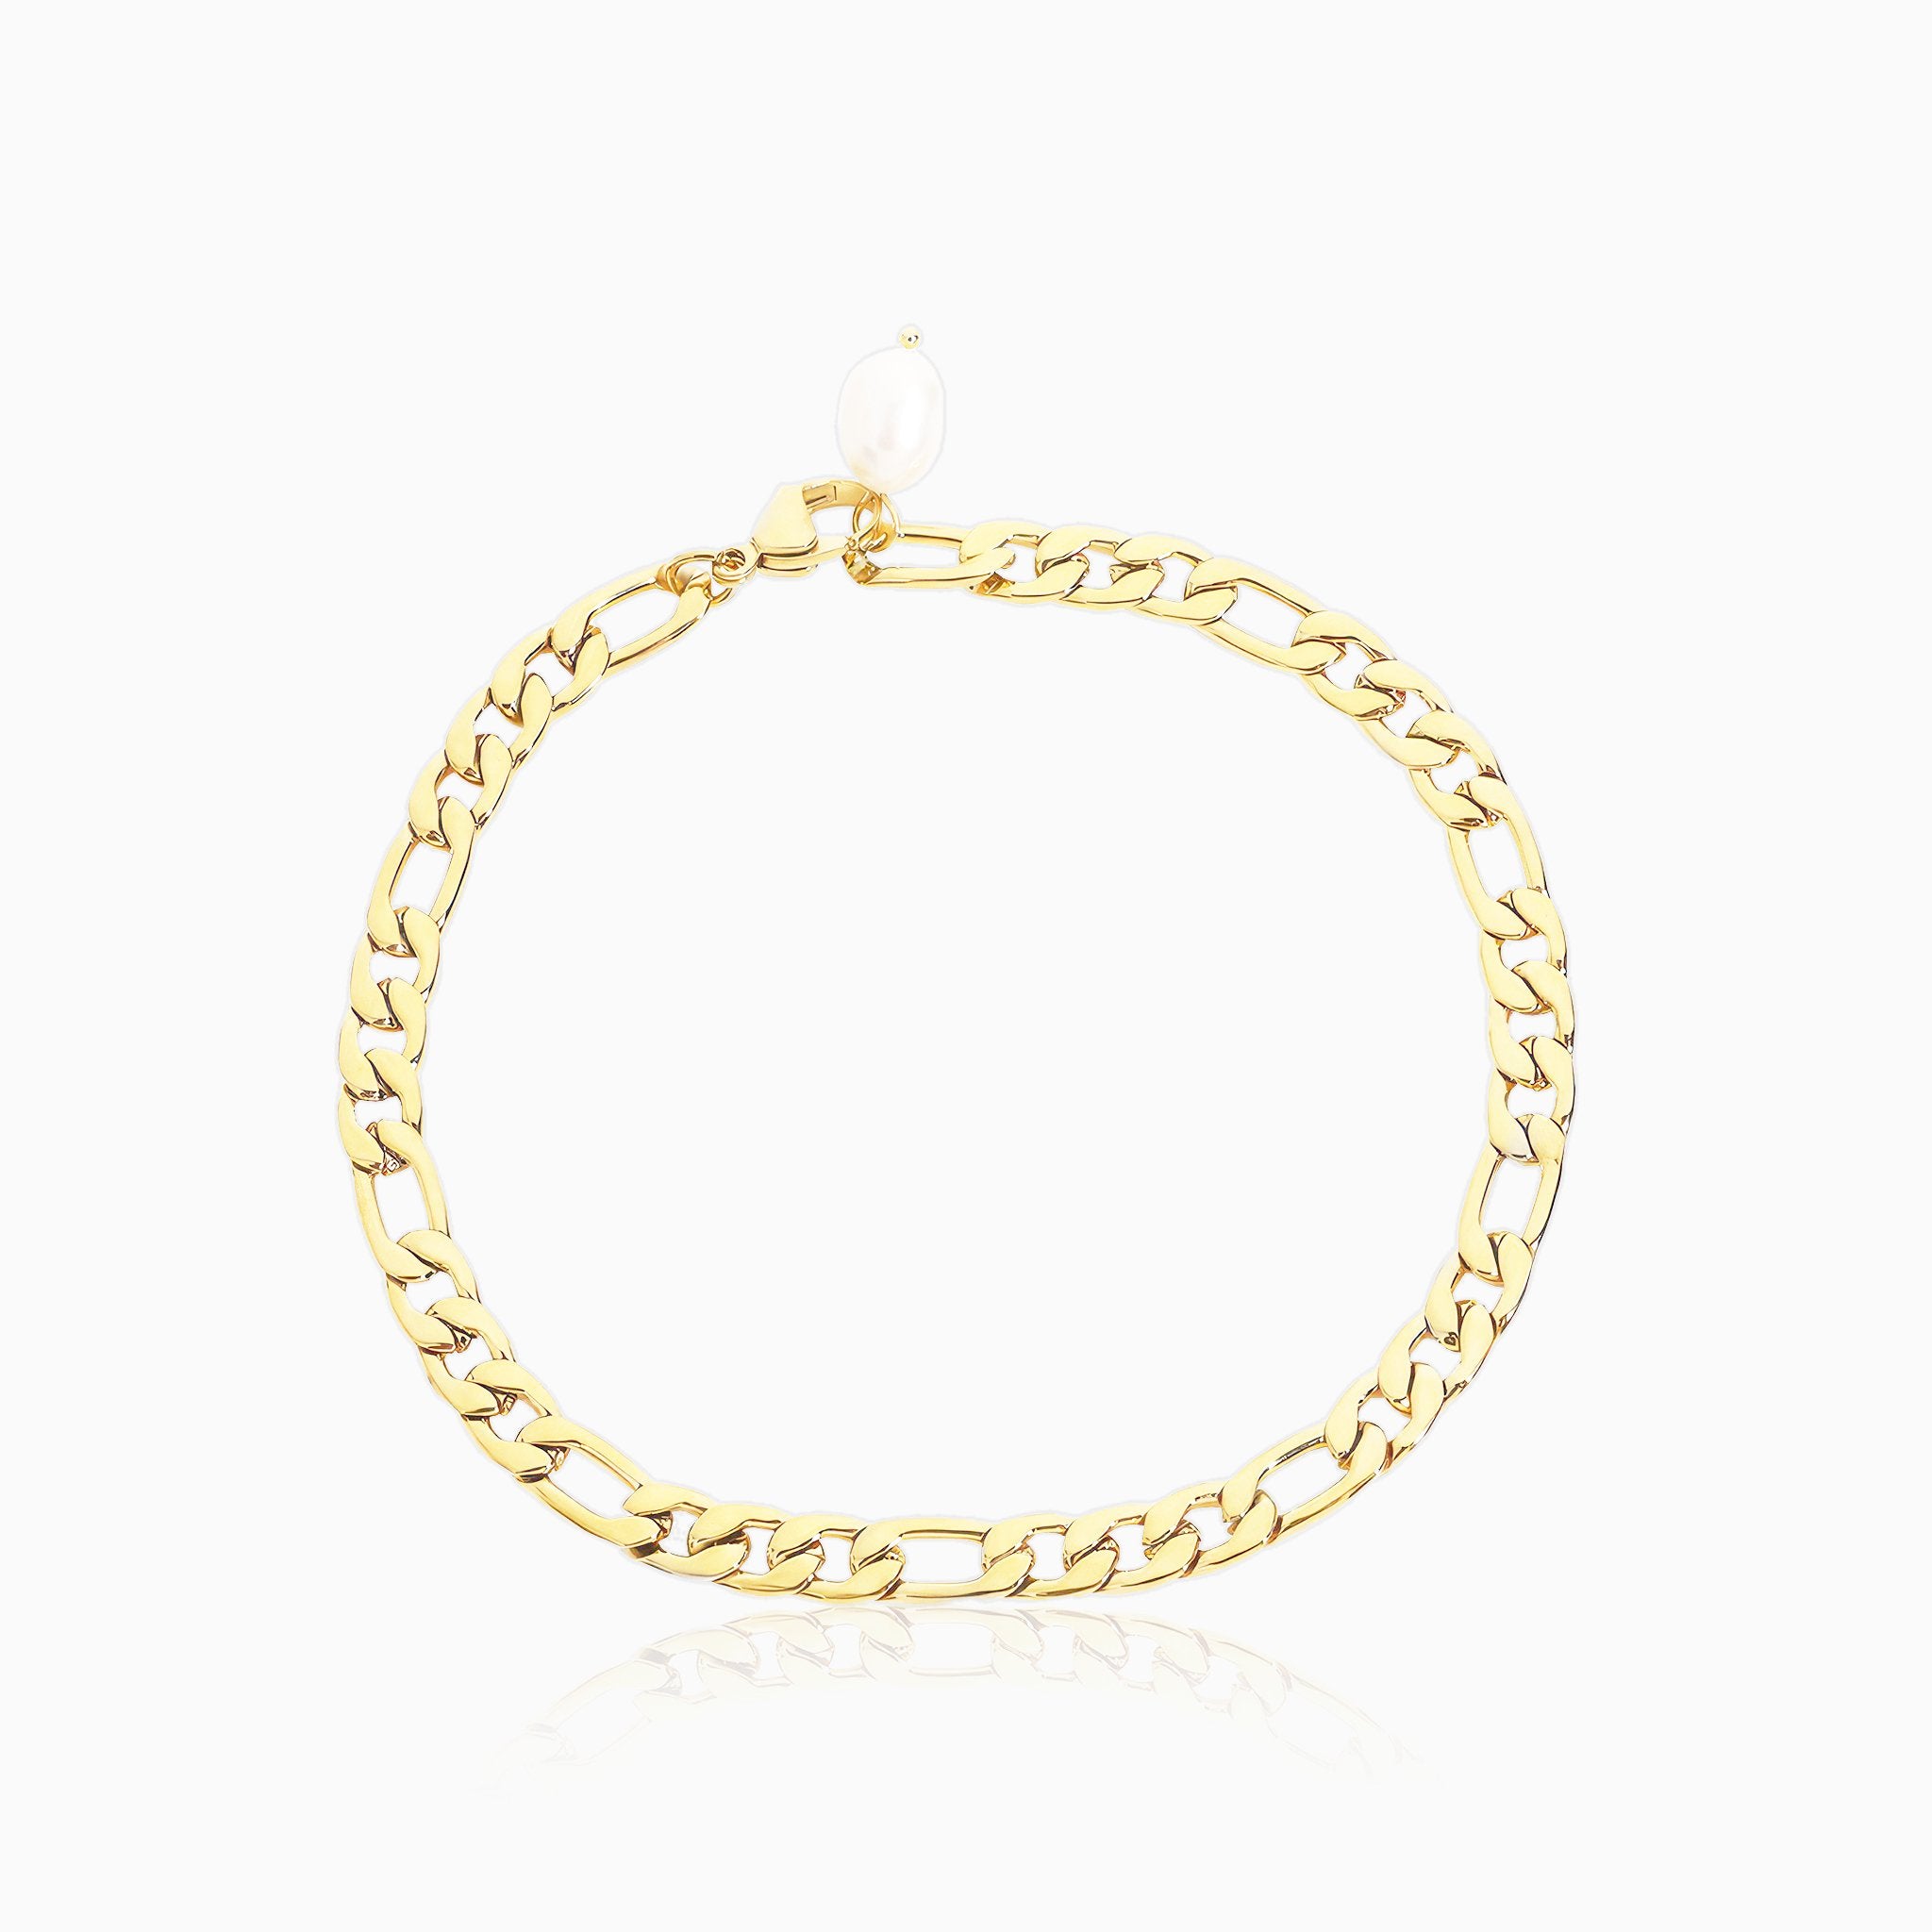 Baroque Pearl Anklet - Nobbier - Anklet - 18K Gold And Titanium PVD Coated Jewelry